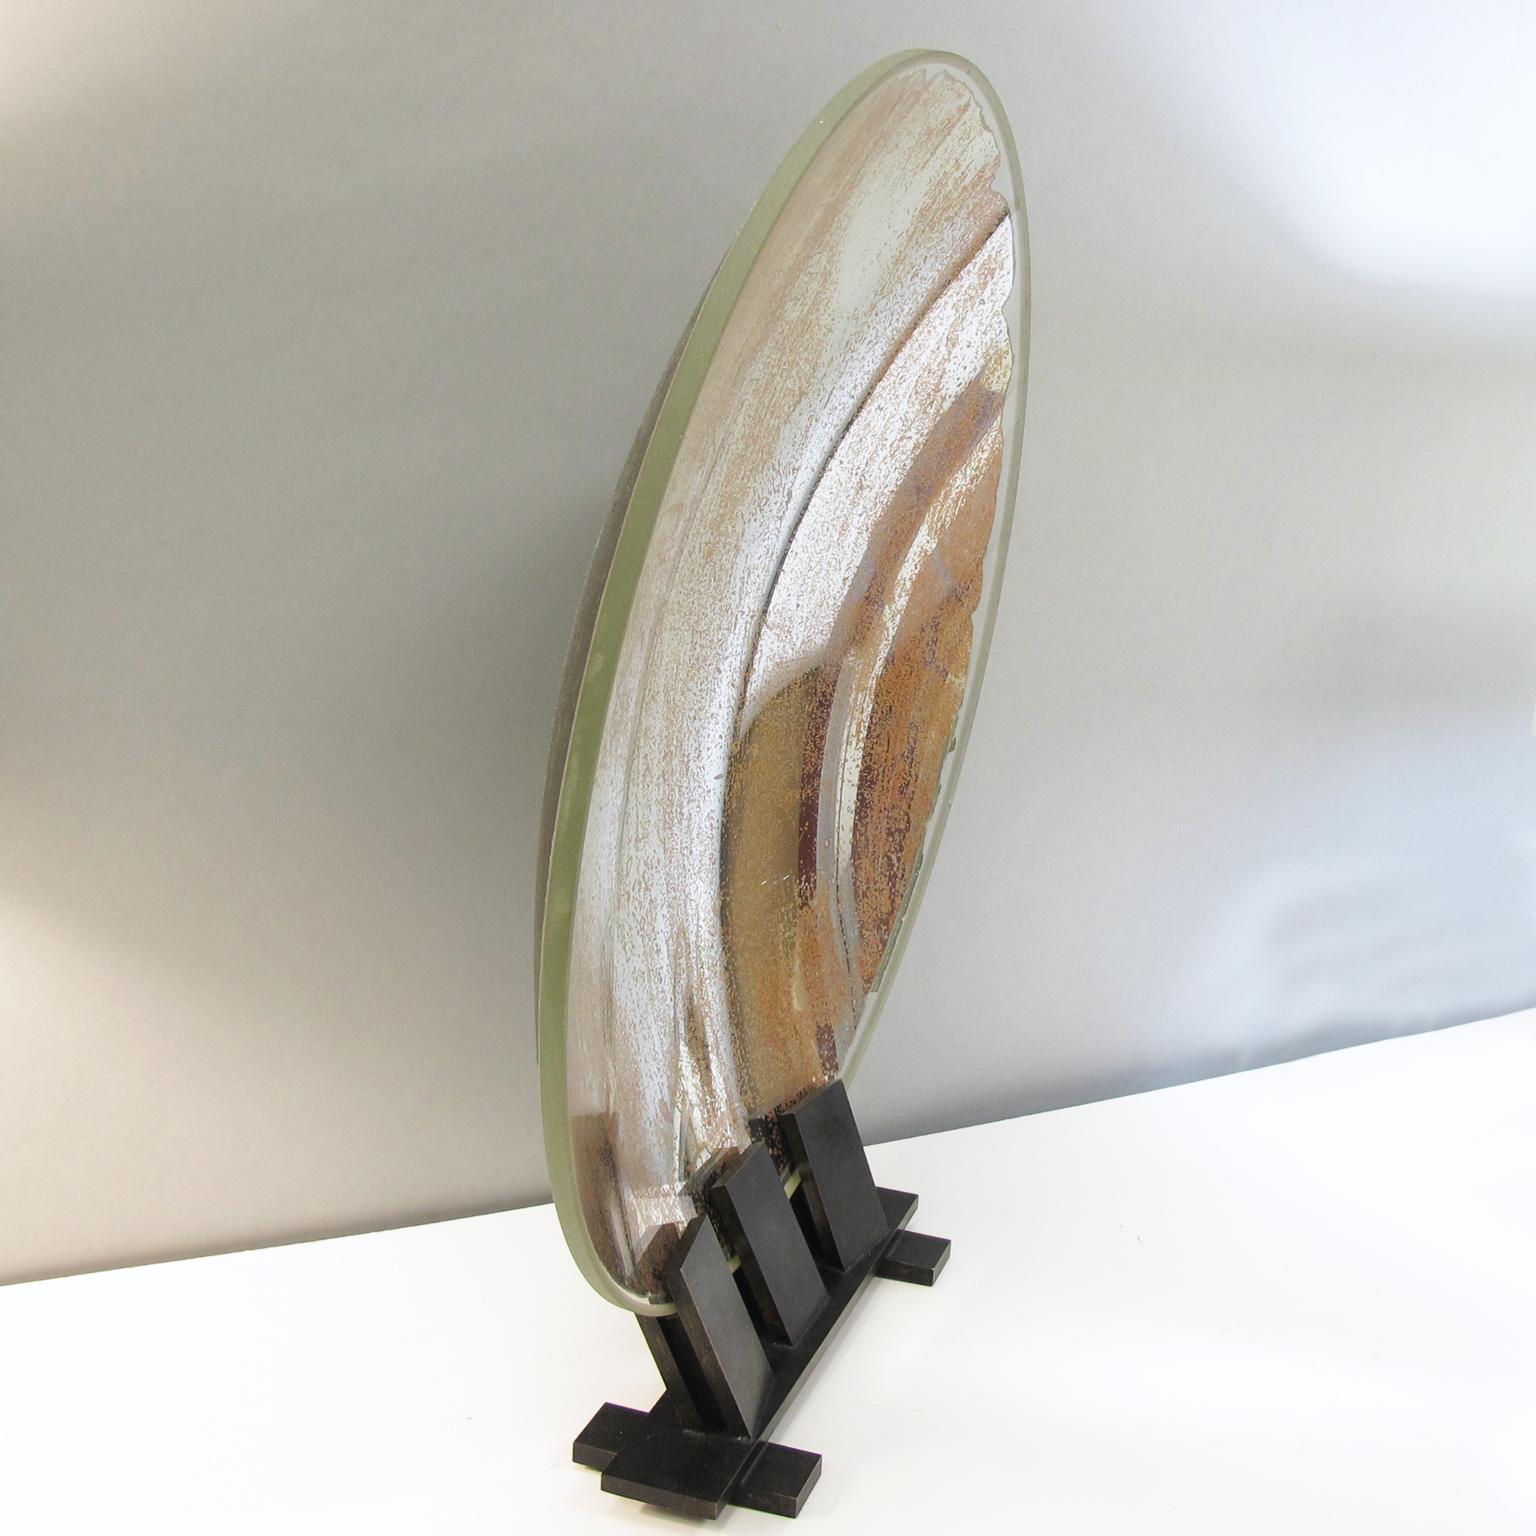 French Industrial Lighthouse Mirror Optic Lens Sculpture